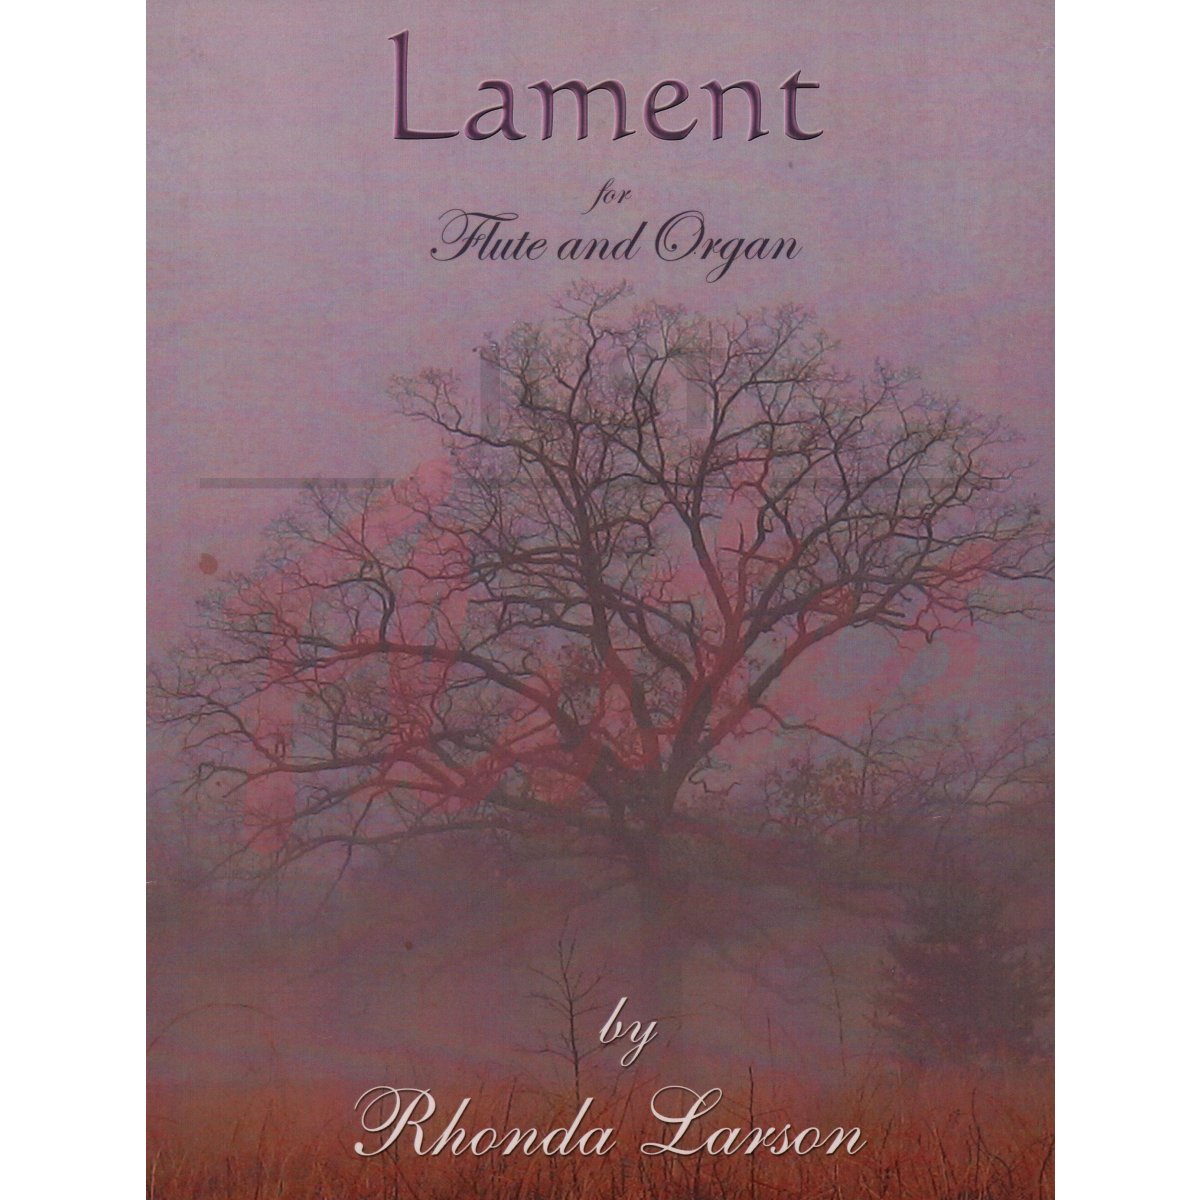 Lament for Flute and Organ